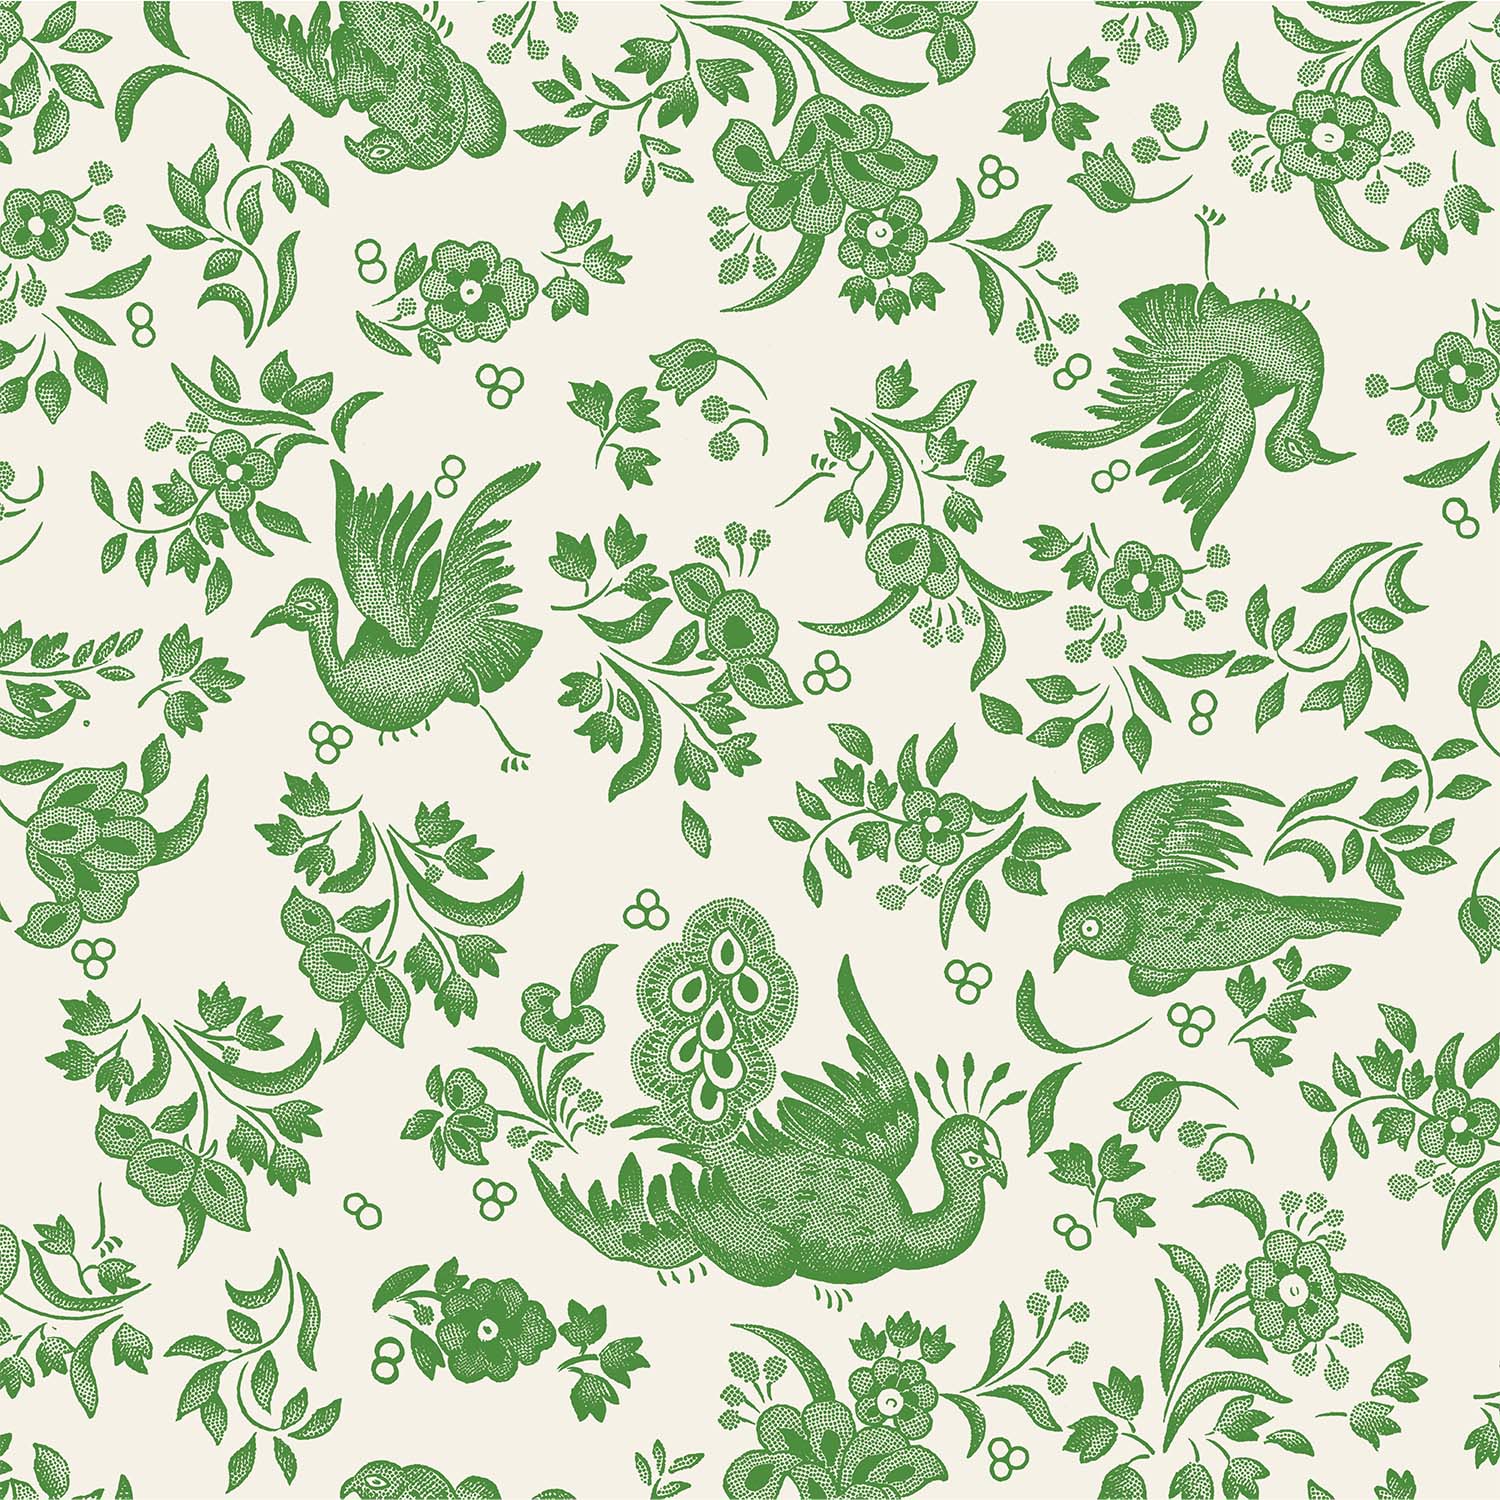 A Green Regal Peacock Napkins pattern with flowers.